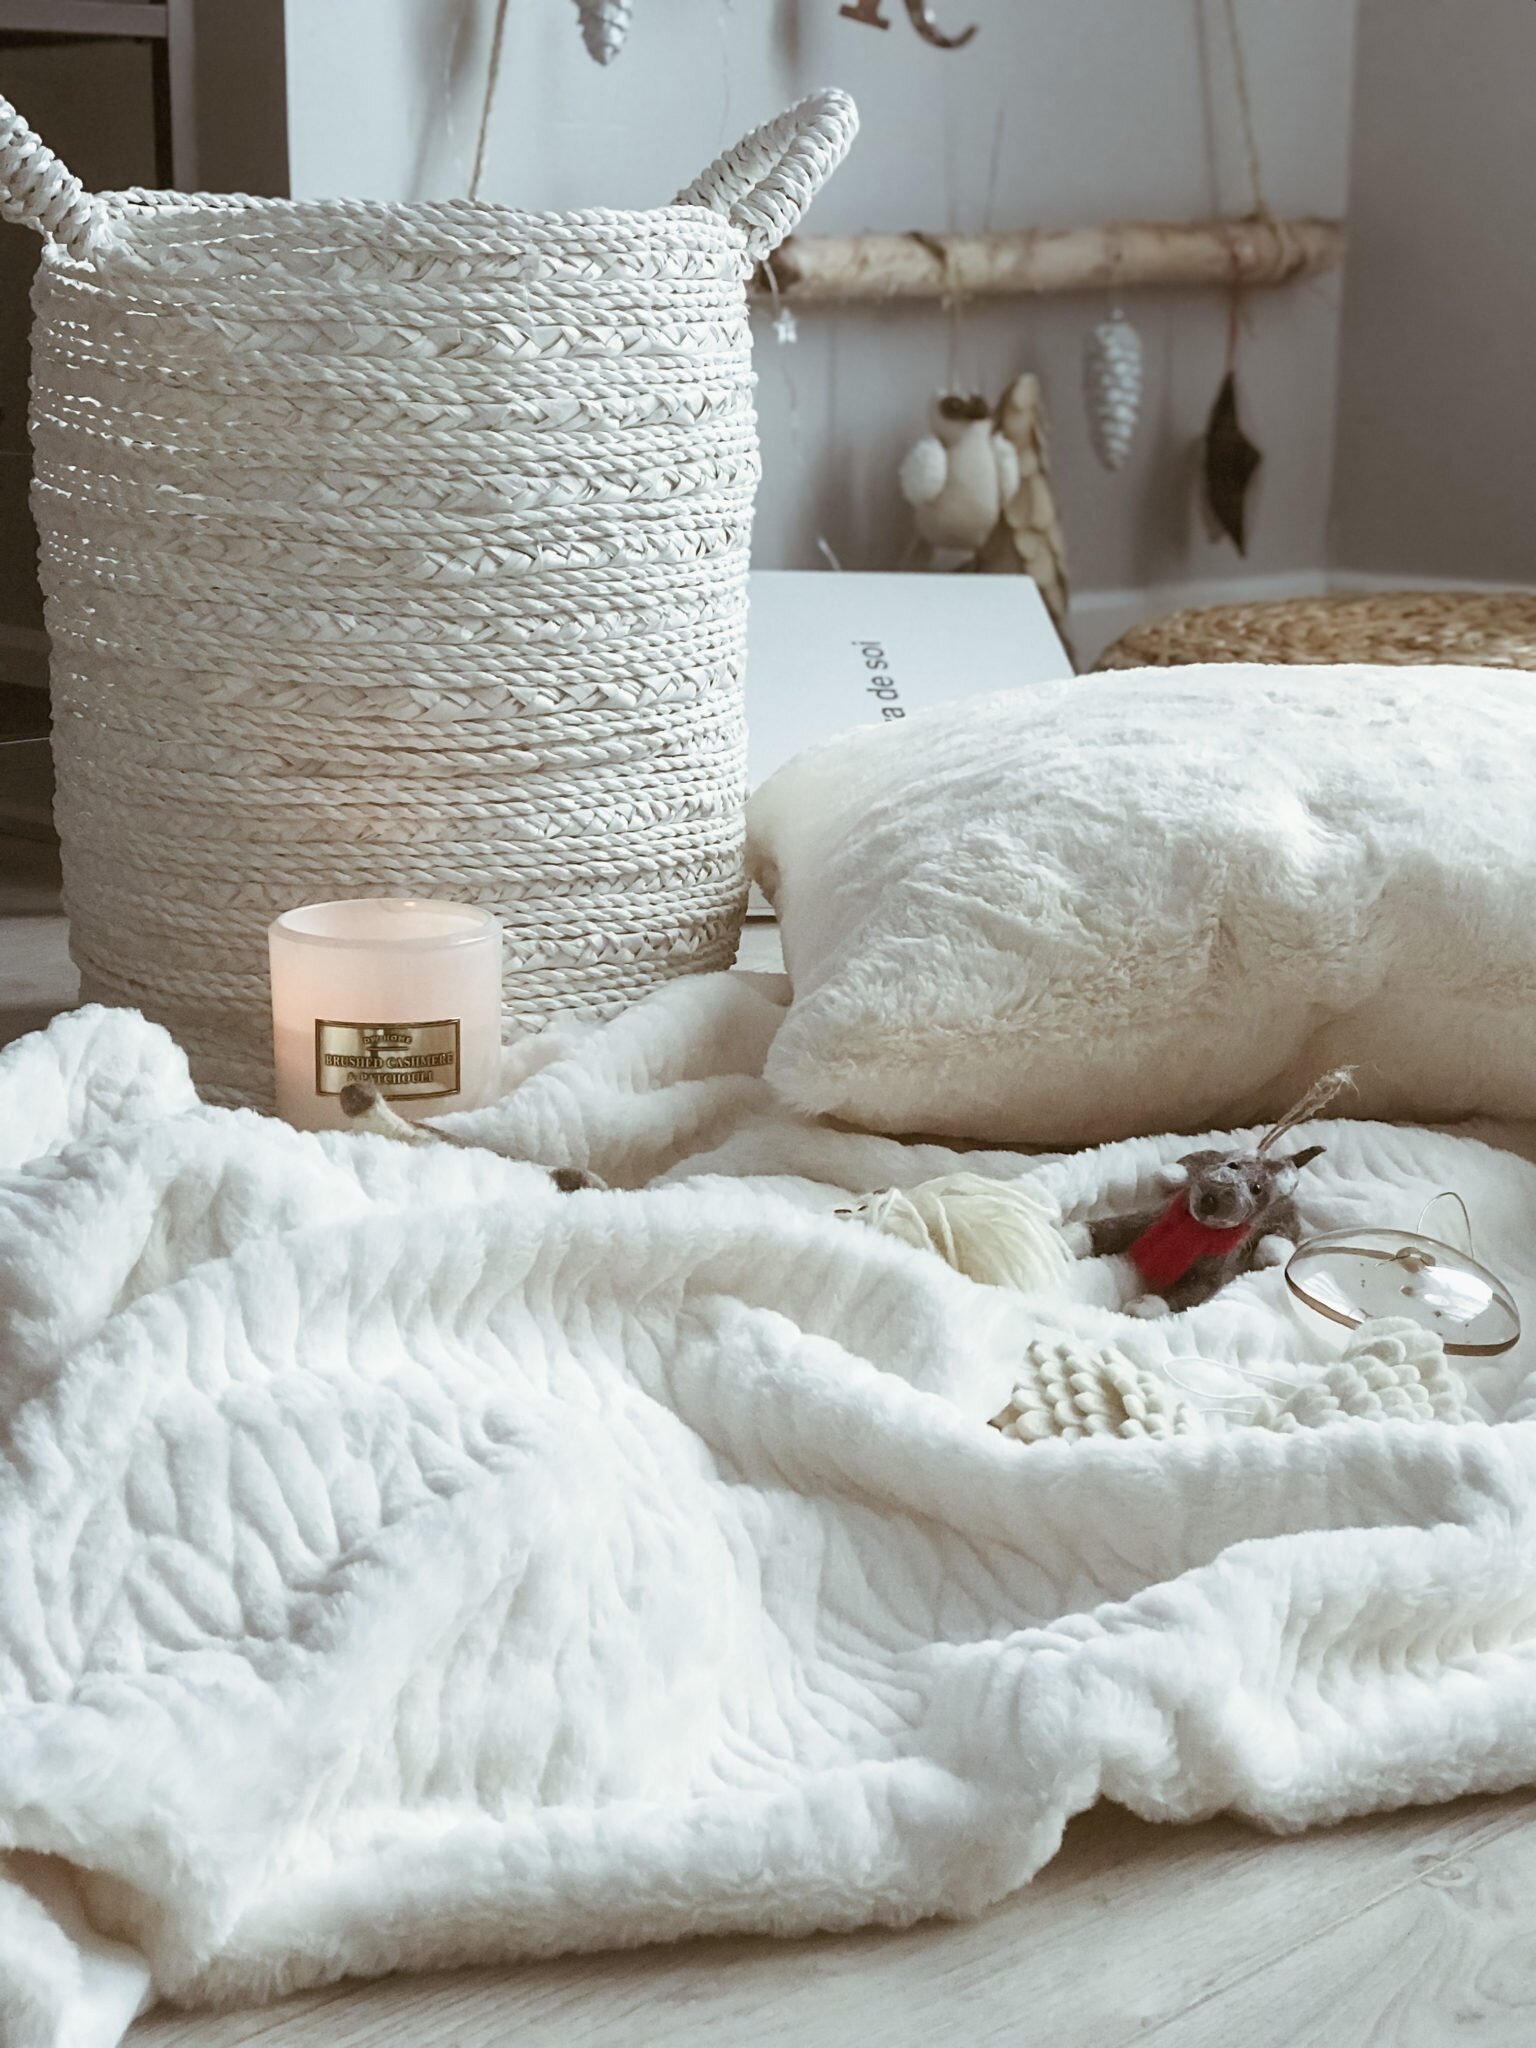 Our Cozy Christmas Nook // Petite and Bold